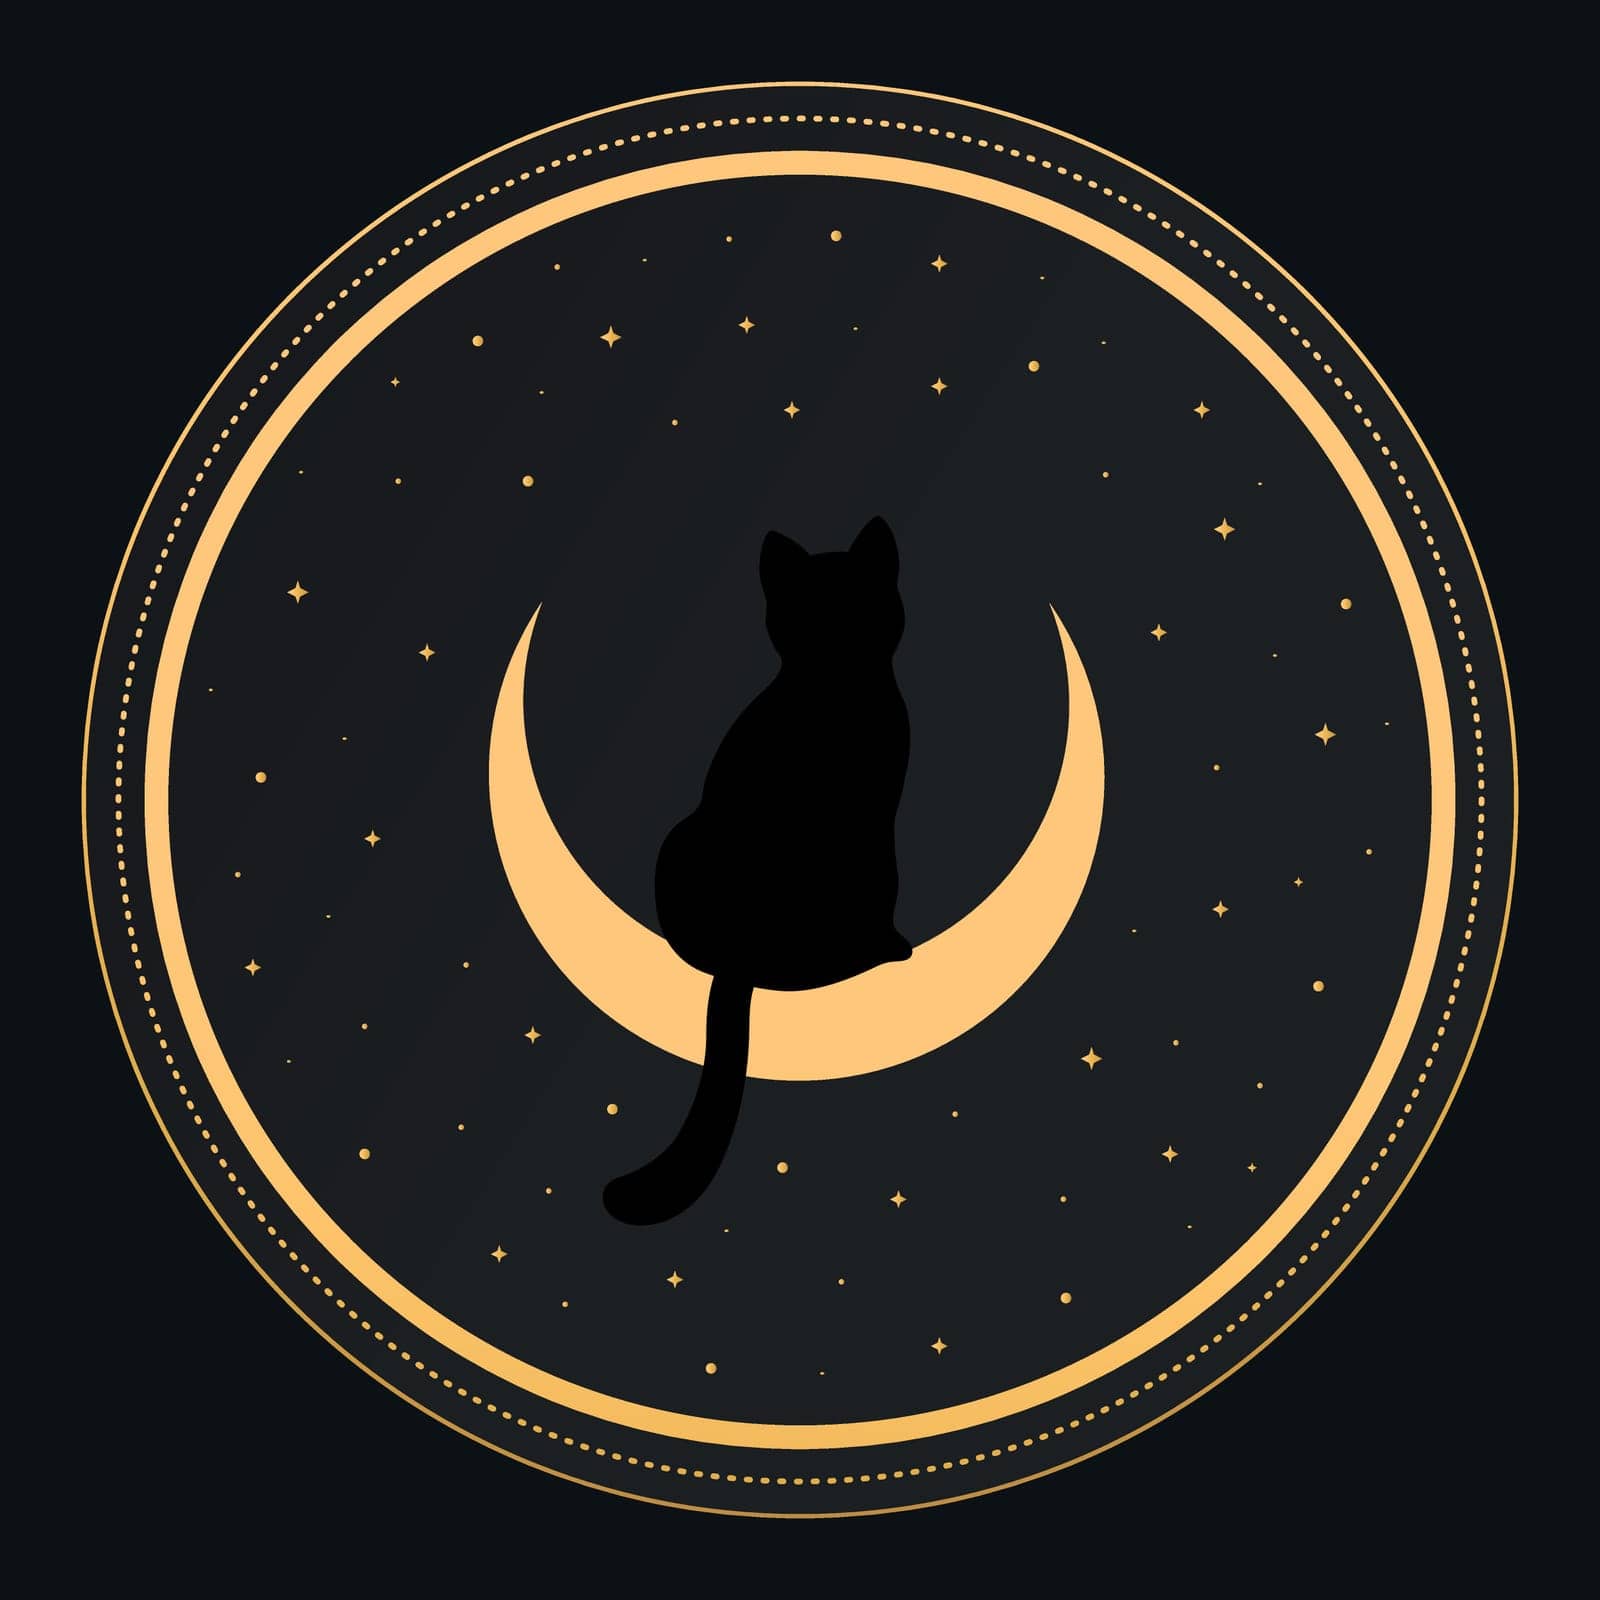 Black cat sitting on a crescent. Back view. Magic and sorcery background. Vector illustration by psychoche